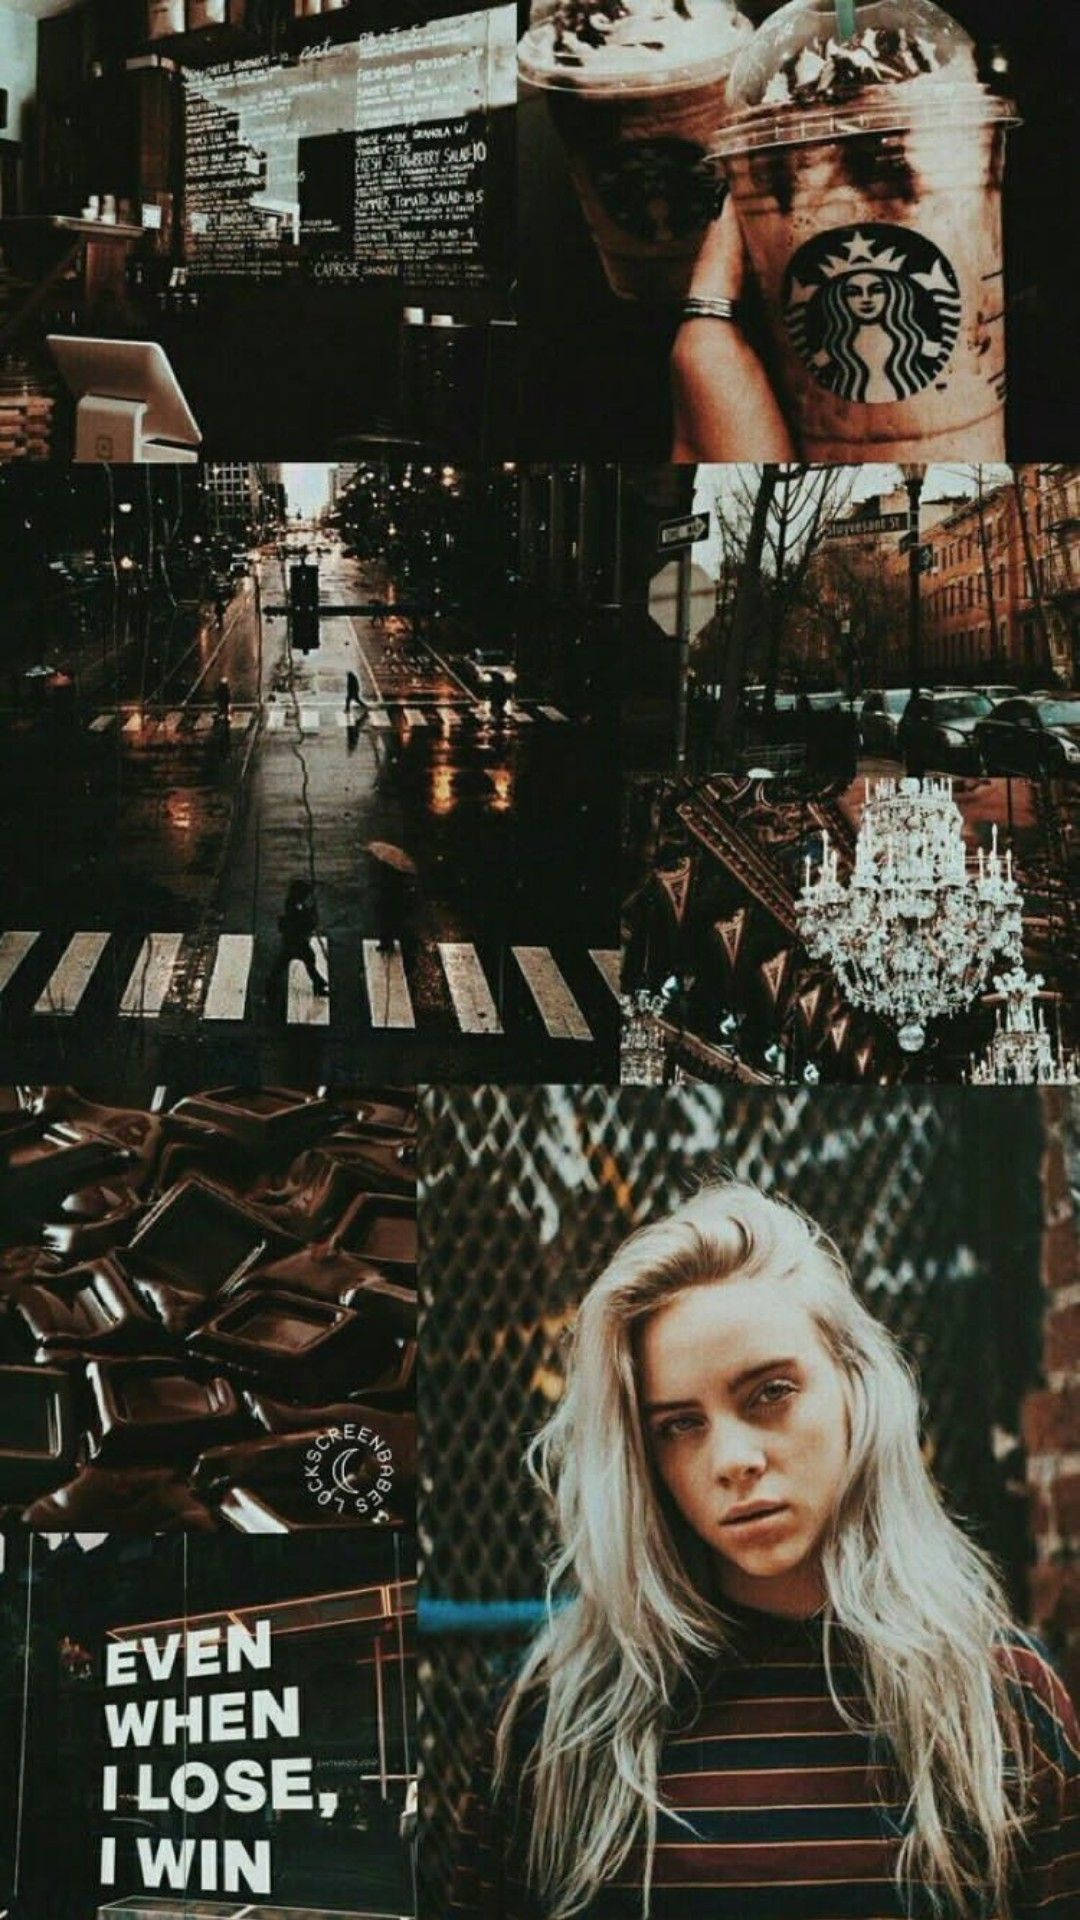 Billie Eilish aesthetic background with coffee, city, and the words 